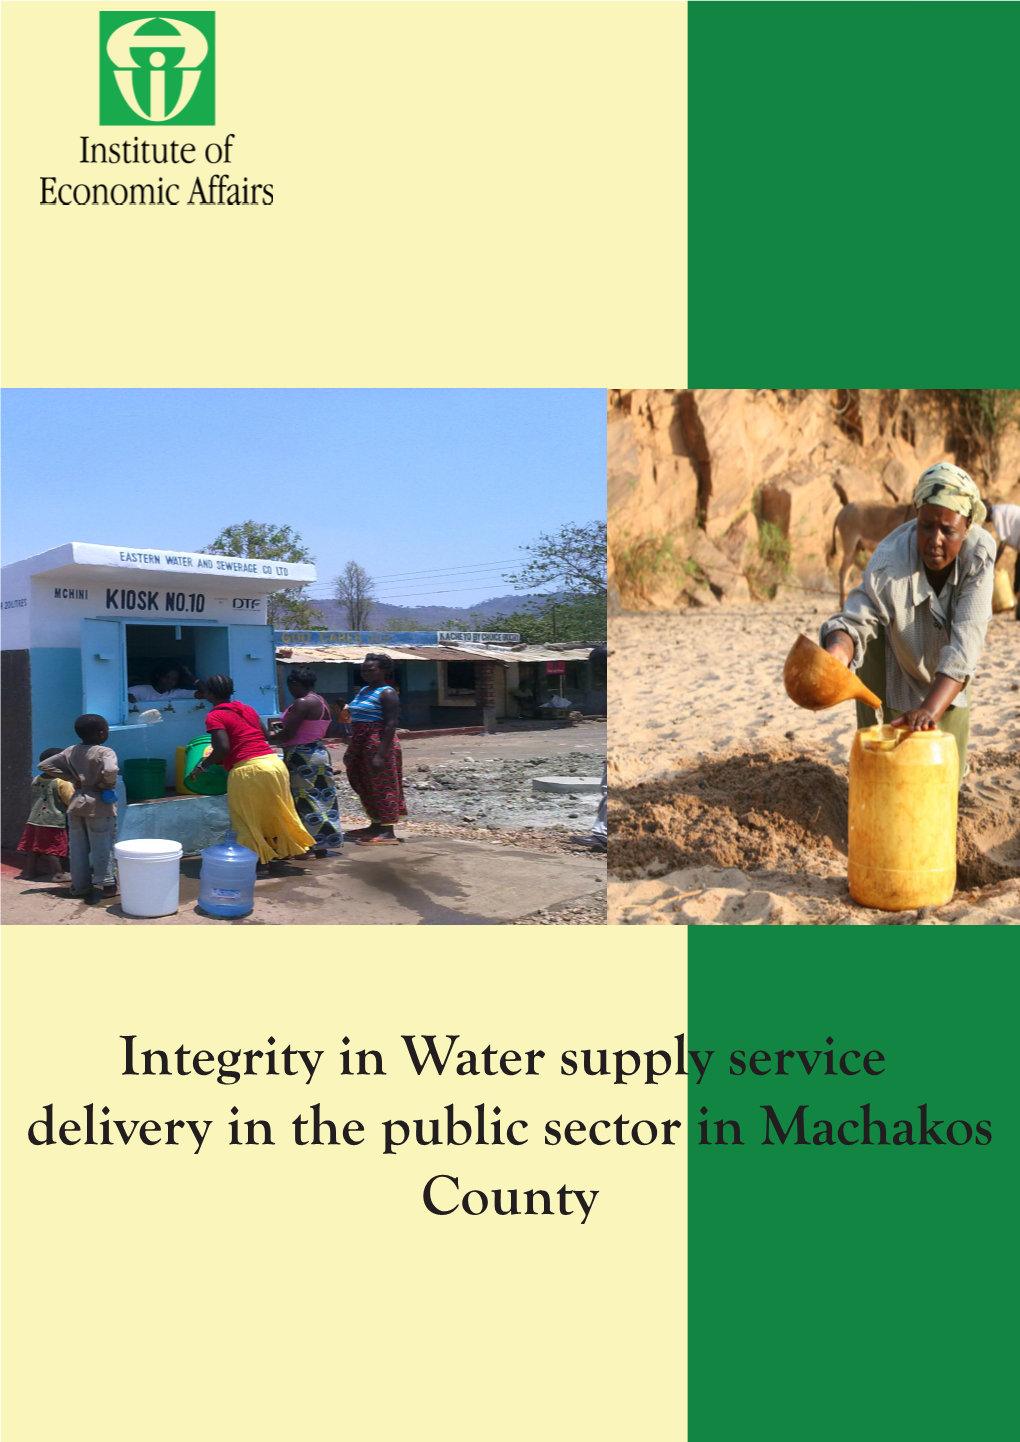 Integrity in Water Supply Service Delivery in the Public Sector in Machakos County Integrity in Water Supply Service Delivery in the Public Sector in Machakos County